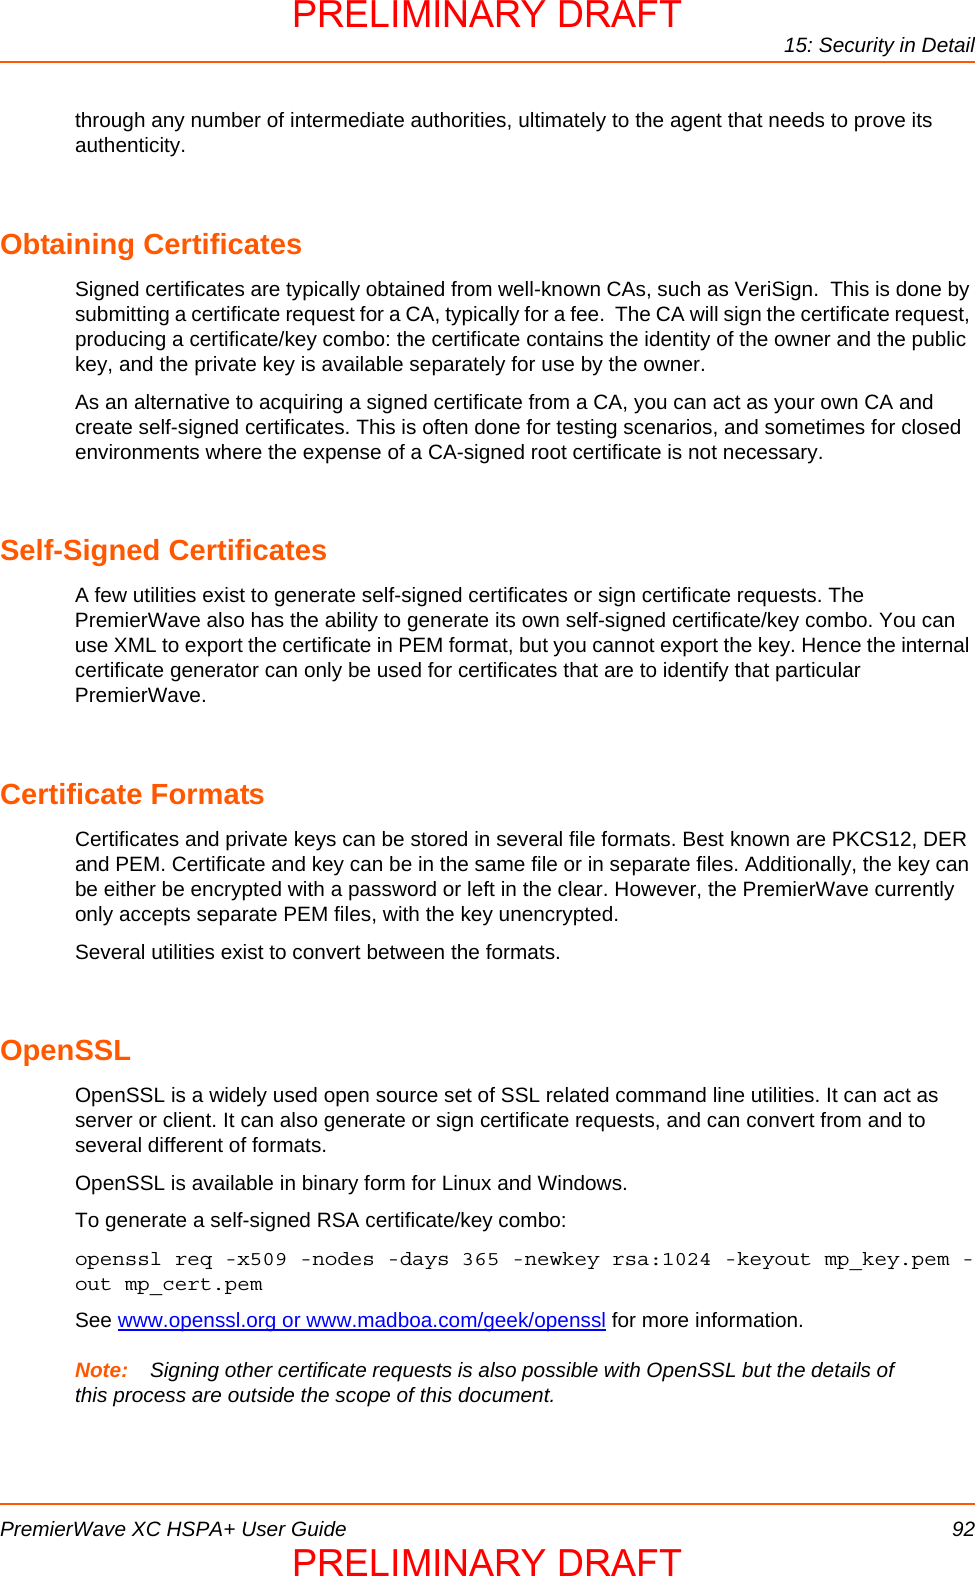 15: Security in DetailPremierWave XC HSPA+ User Guide 92through any number of intermediate authorities, ultimately to the agent that needs to prove its authenticity. Obtaining CertificatesSigned certificates are typically obtained from well-known CAs, such as VeriSign.  This is done by submitting a certificate request for a CA, typically for a fee.  The CA will sign the certificate request, producing a certificate/key combo: the certificate contains the identity of the owner and the public key, and the private key is available separately for use by the owner.As an alternative to acquiring a signed certificate from a CA, you can act as your own CA and create self-signed certificates. This is often done for testing scenarios, and sometimes for closed environments where the expense of a CA-signed root certificate is not necessary.Self-Signed CertificatesA few utilities exist to generate self-signed certificates or sign certificate requests. The PremierWave also has the ability to generate its own self-signed certificate/key combo. You can use XML to export the certificate in PEM format, but you cannot export the key. Hence the internal certificate generator can only be used for certificates that are to identify that particular PremierWave.Certificate FormatsCertificates and private keys can be stored in several file formats. Best known are PKCS12, DER and PEM. Certificate and key can be in the same file or in separate files. Additionally, the key can be either be encrypted with a password or left in the clear. However, the PremierWave currently only accepts separate PEM files, with the key unencrypted.Several utilities exist to convert between the formats.OpenSSLOpenSSL is a widely used open source set of SSL related command line utilities. It can act as server or client. It can also generate or sign certificate requests, and can convert from and to several different of formats.OpenSSL is available in binary form for Linux and Windows.To generate a self-signed RSA certificate/key combo:openssl req -x509 -nodes -days 365 -newkey rsa:1024 -keyout mp_key.pem -out mp_cert.pemSee www.openssl.org or www.madboa.com/geek/openssl for more information.Note: Signing other certificate requests is also possible with OpenSSL but the details of this process are outside the scope of this document.PRELIMINARY DRAFTPRELIMINARY DRAFT